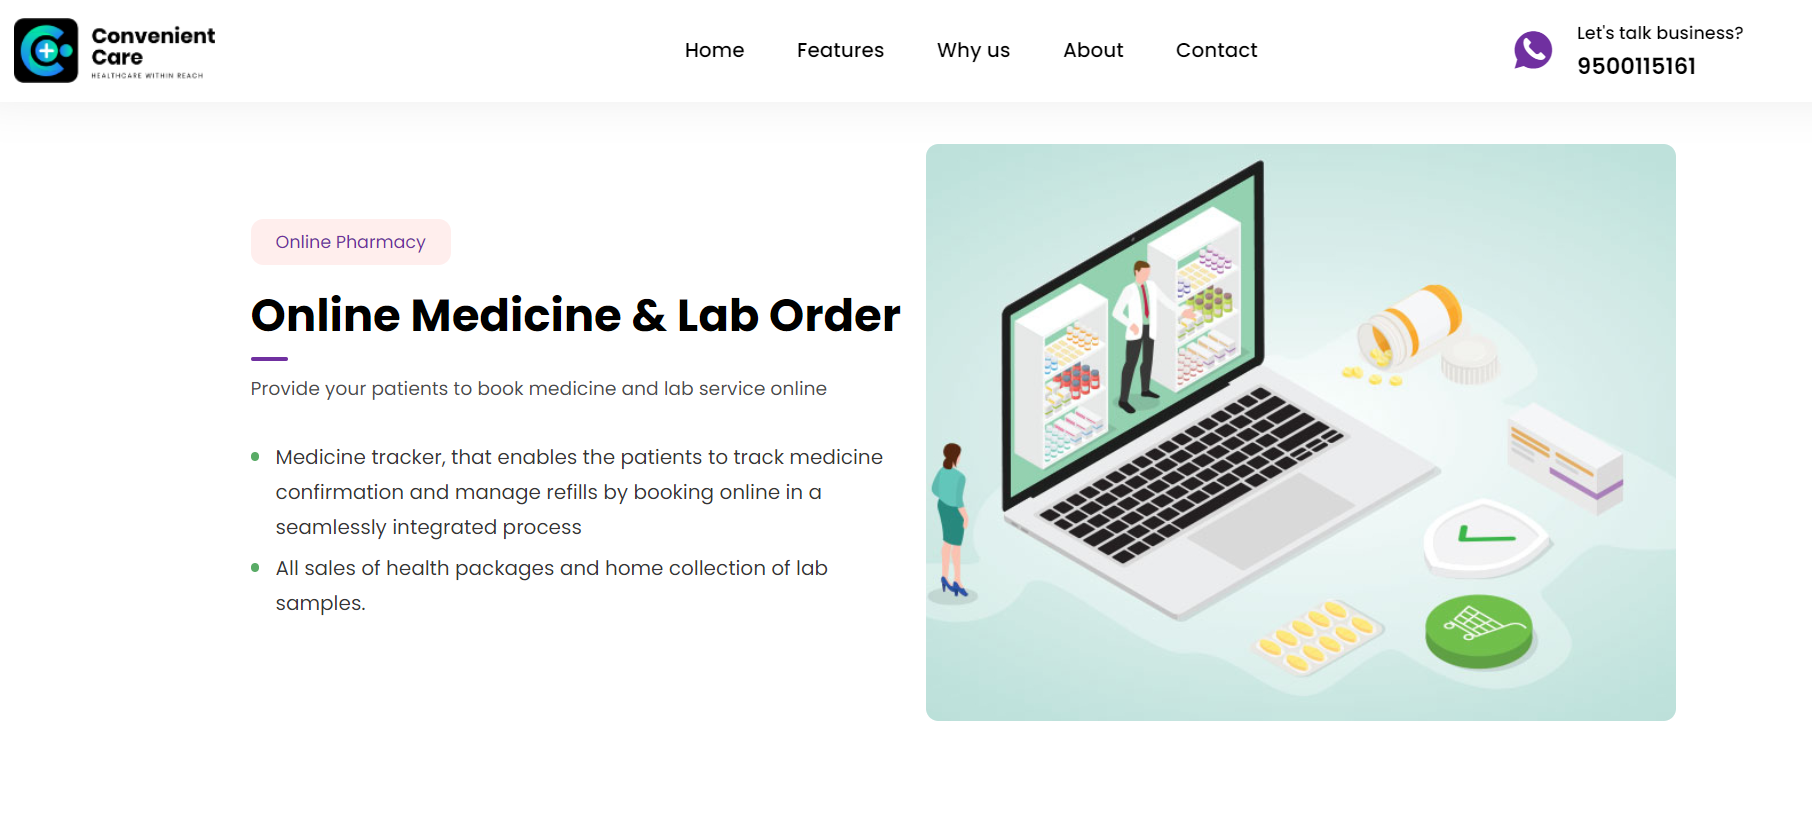 Online Pharmacy and Lab Order